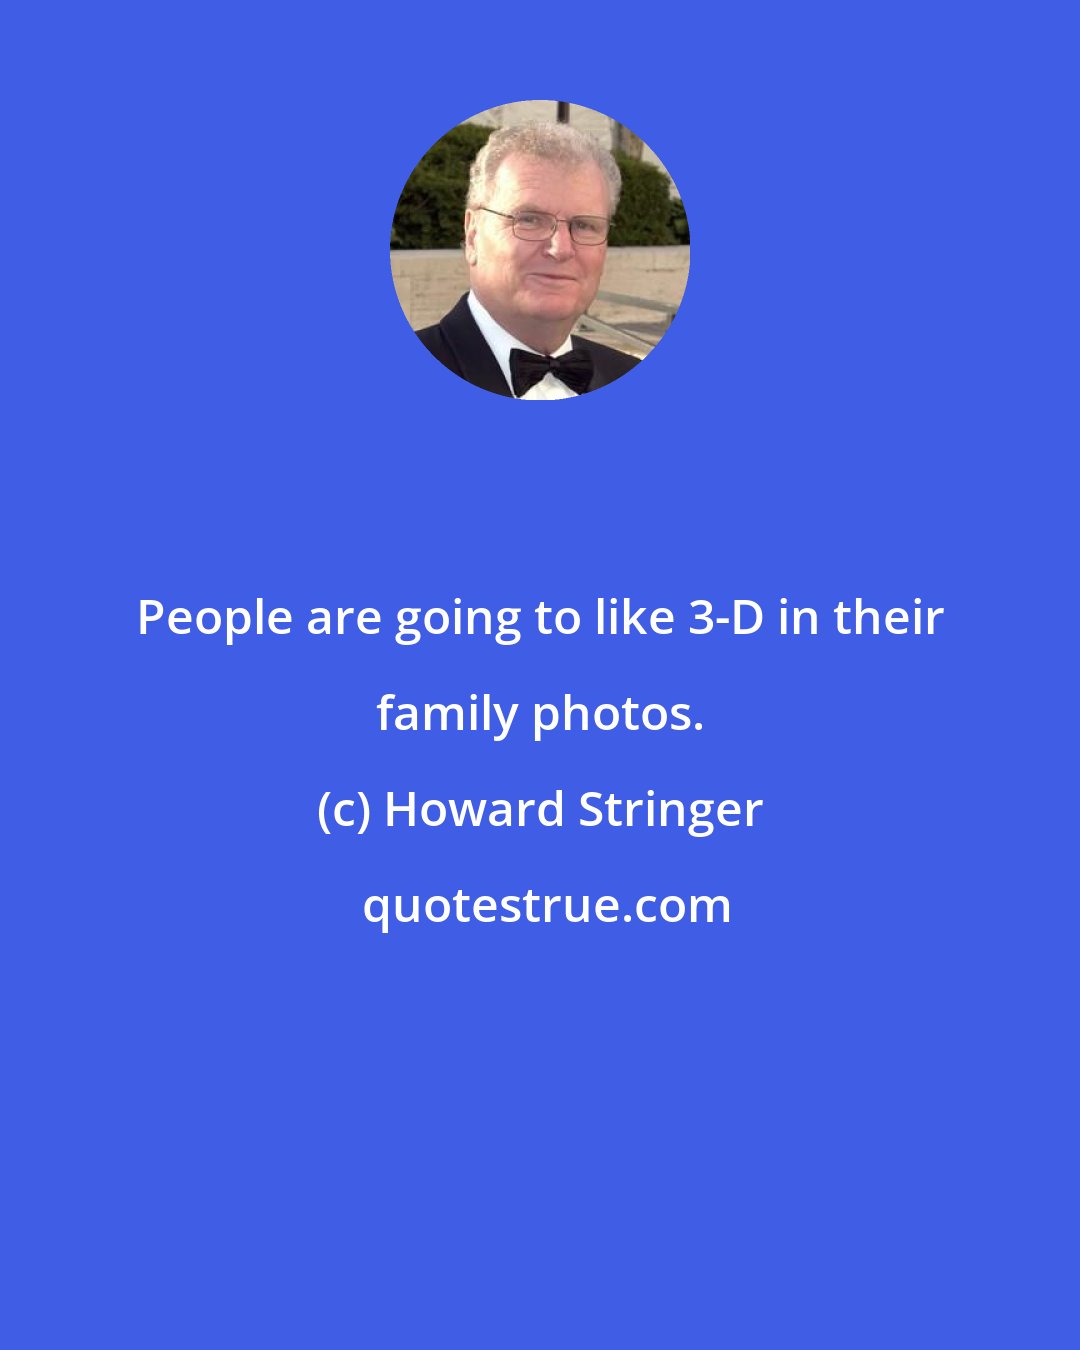 Howard Stringer: People are going to like 3-D in their family photos.